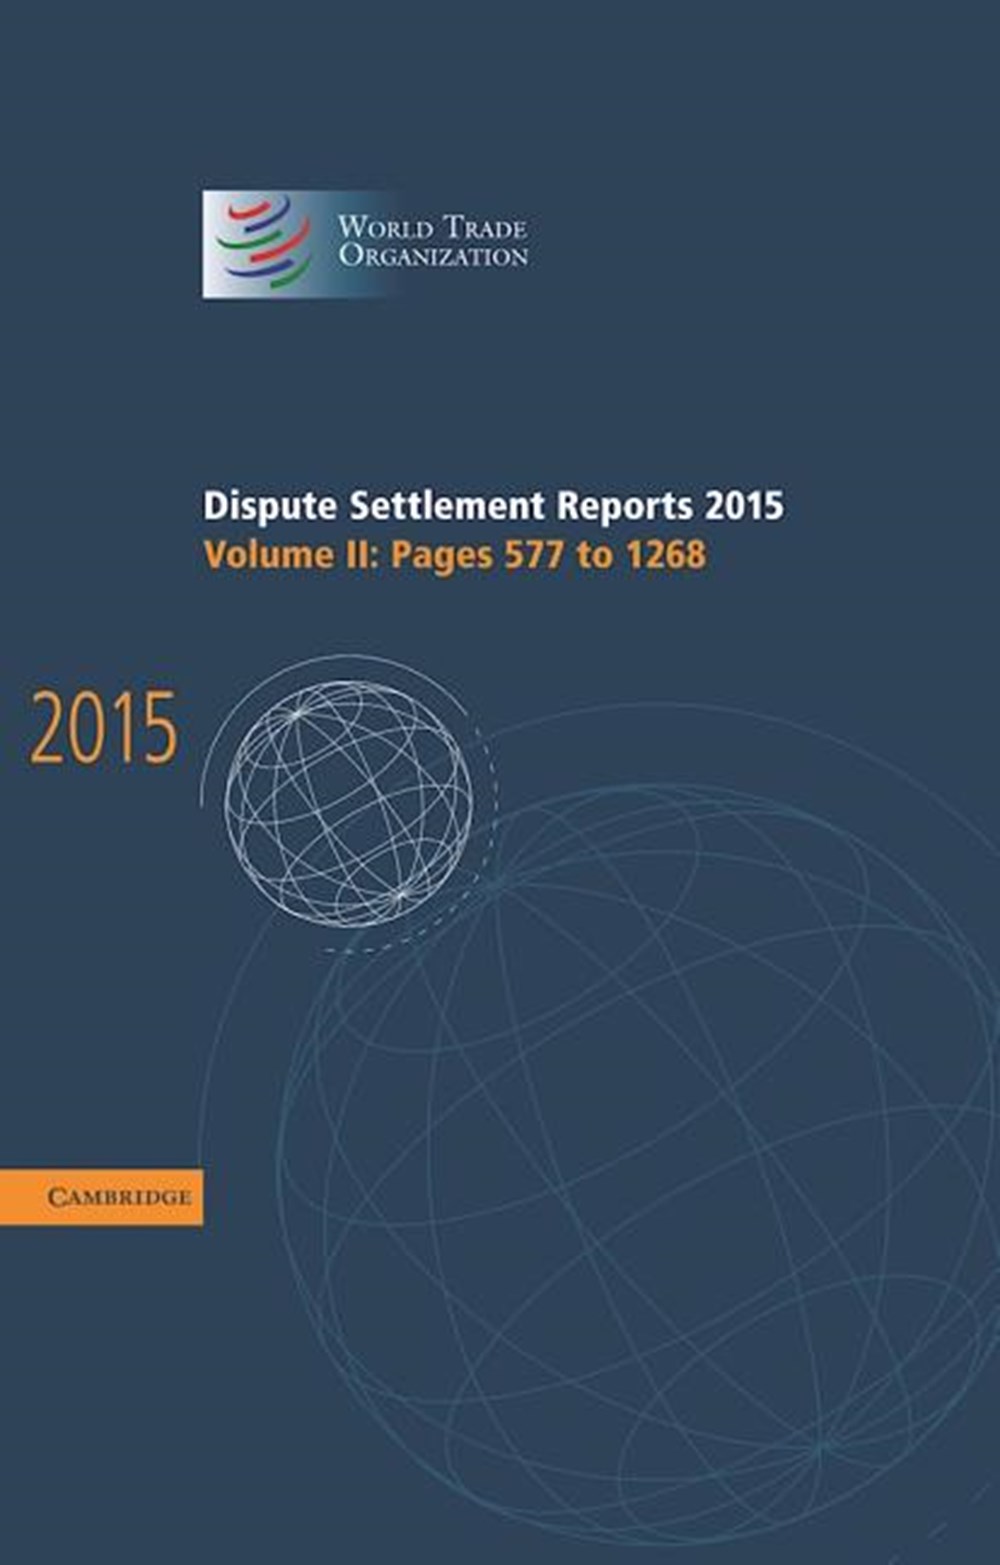 Dispute Settlement Reports 2015 Volume 2, Pages 577-1268